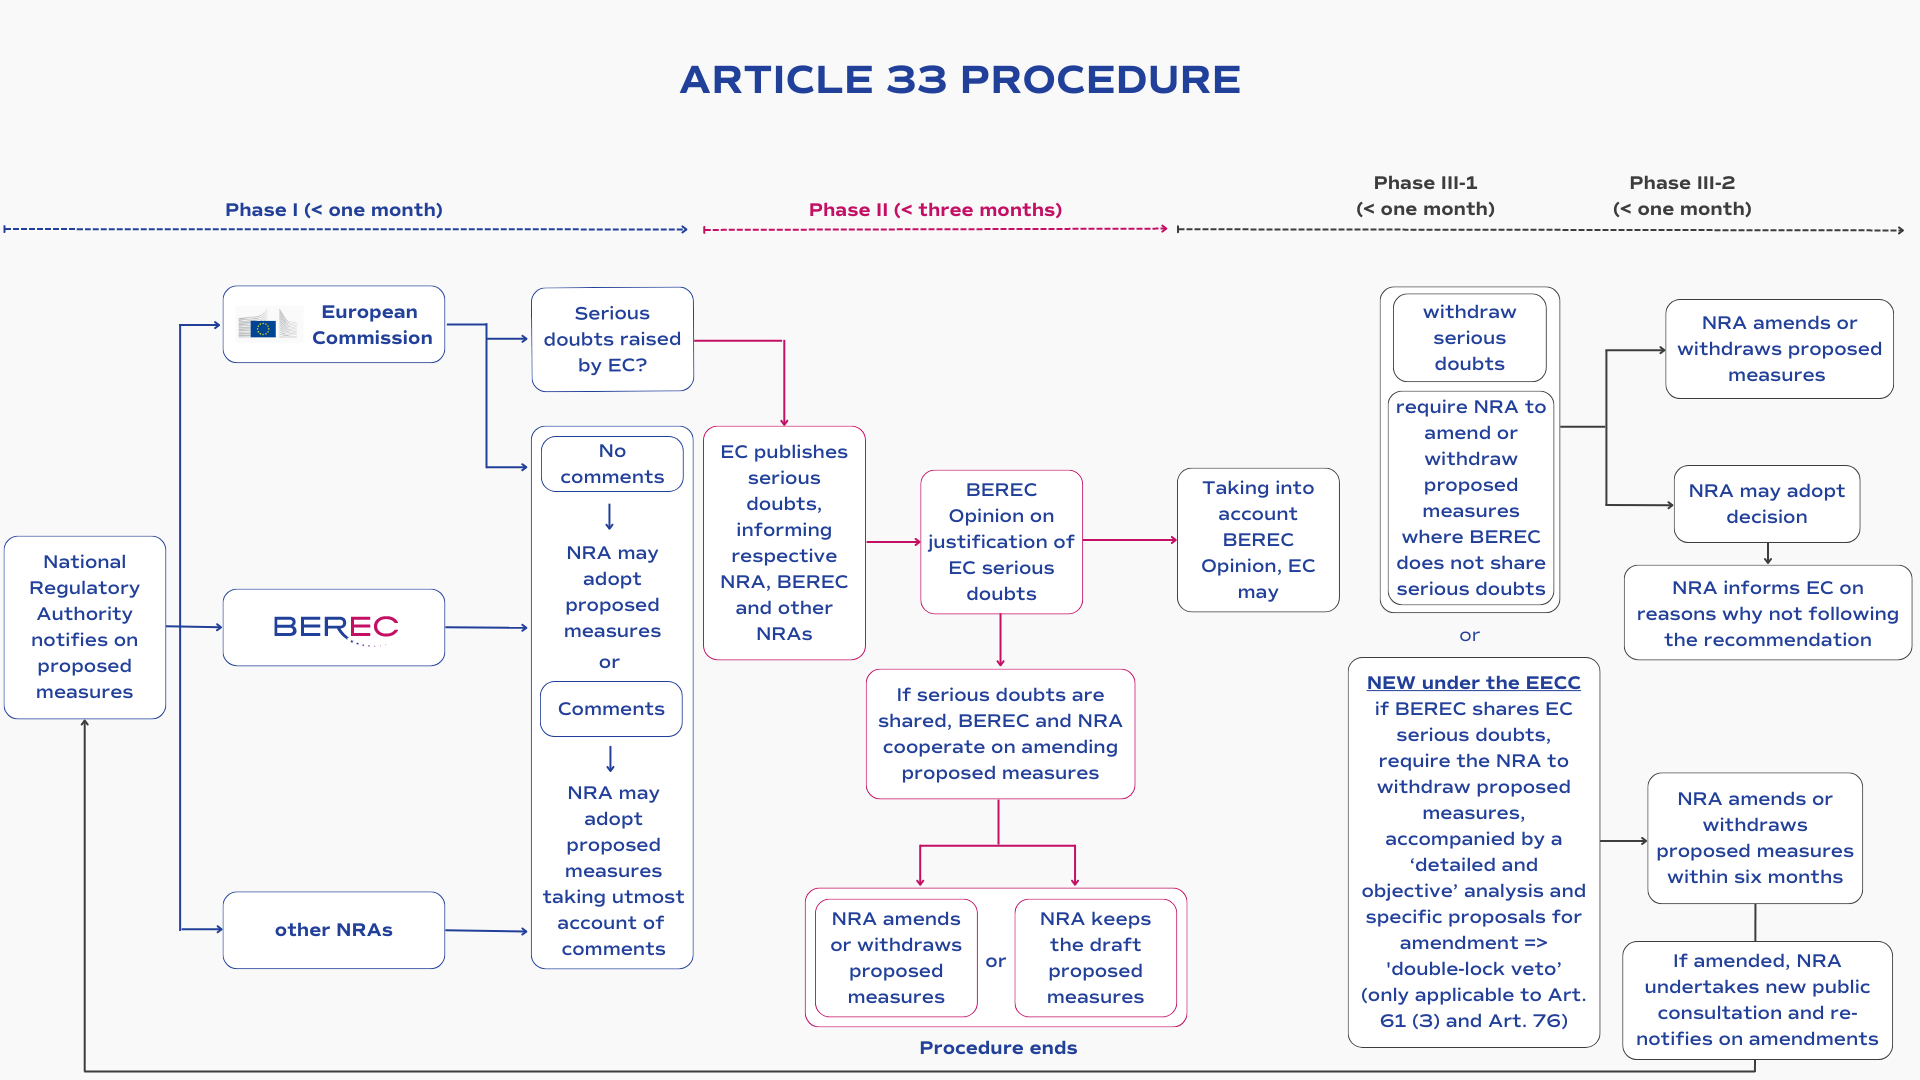 The image visualises the Article 33 procedure, described in the text on this page